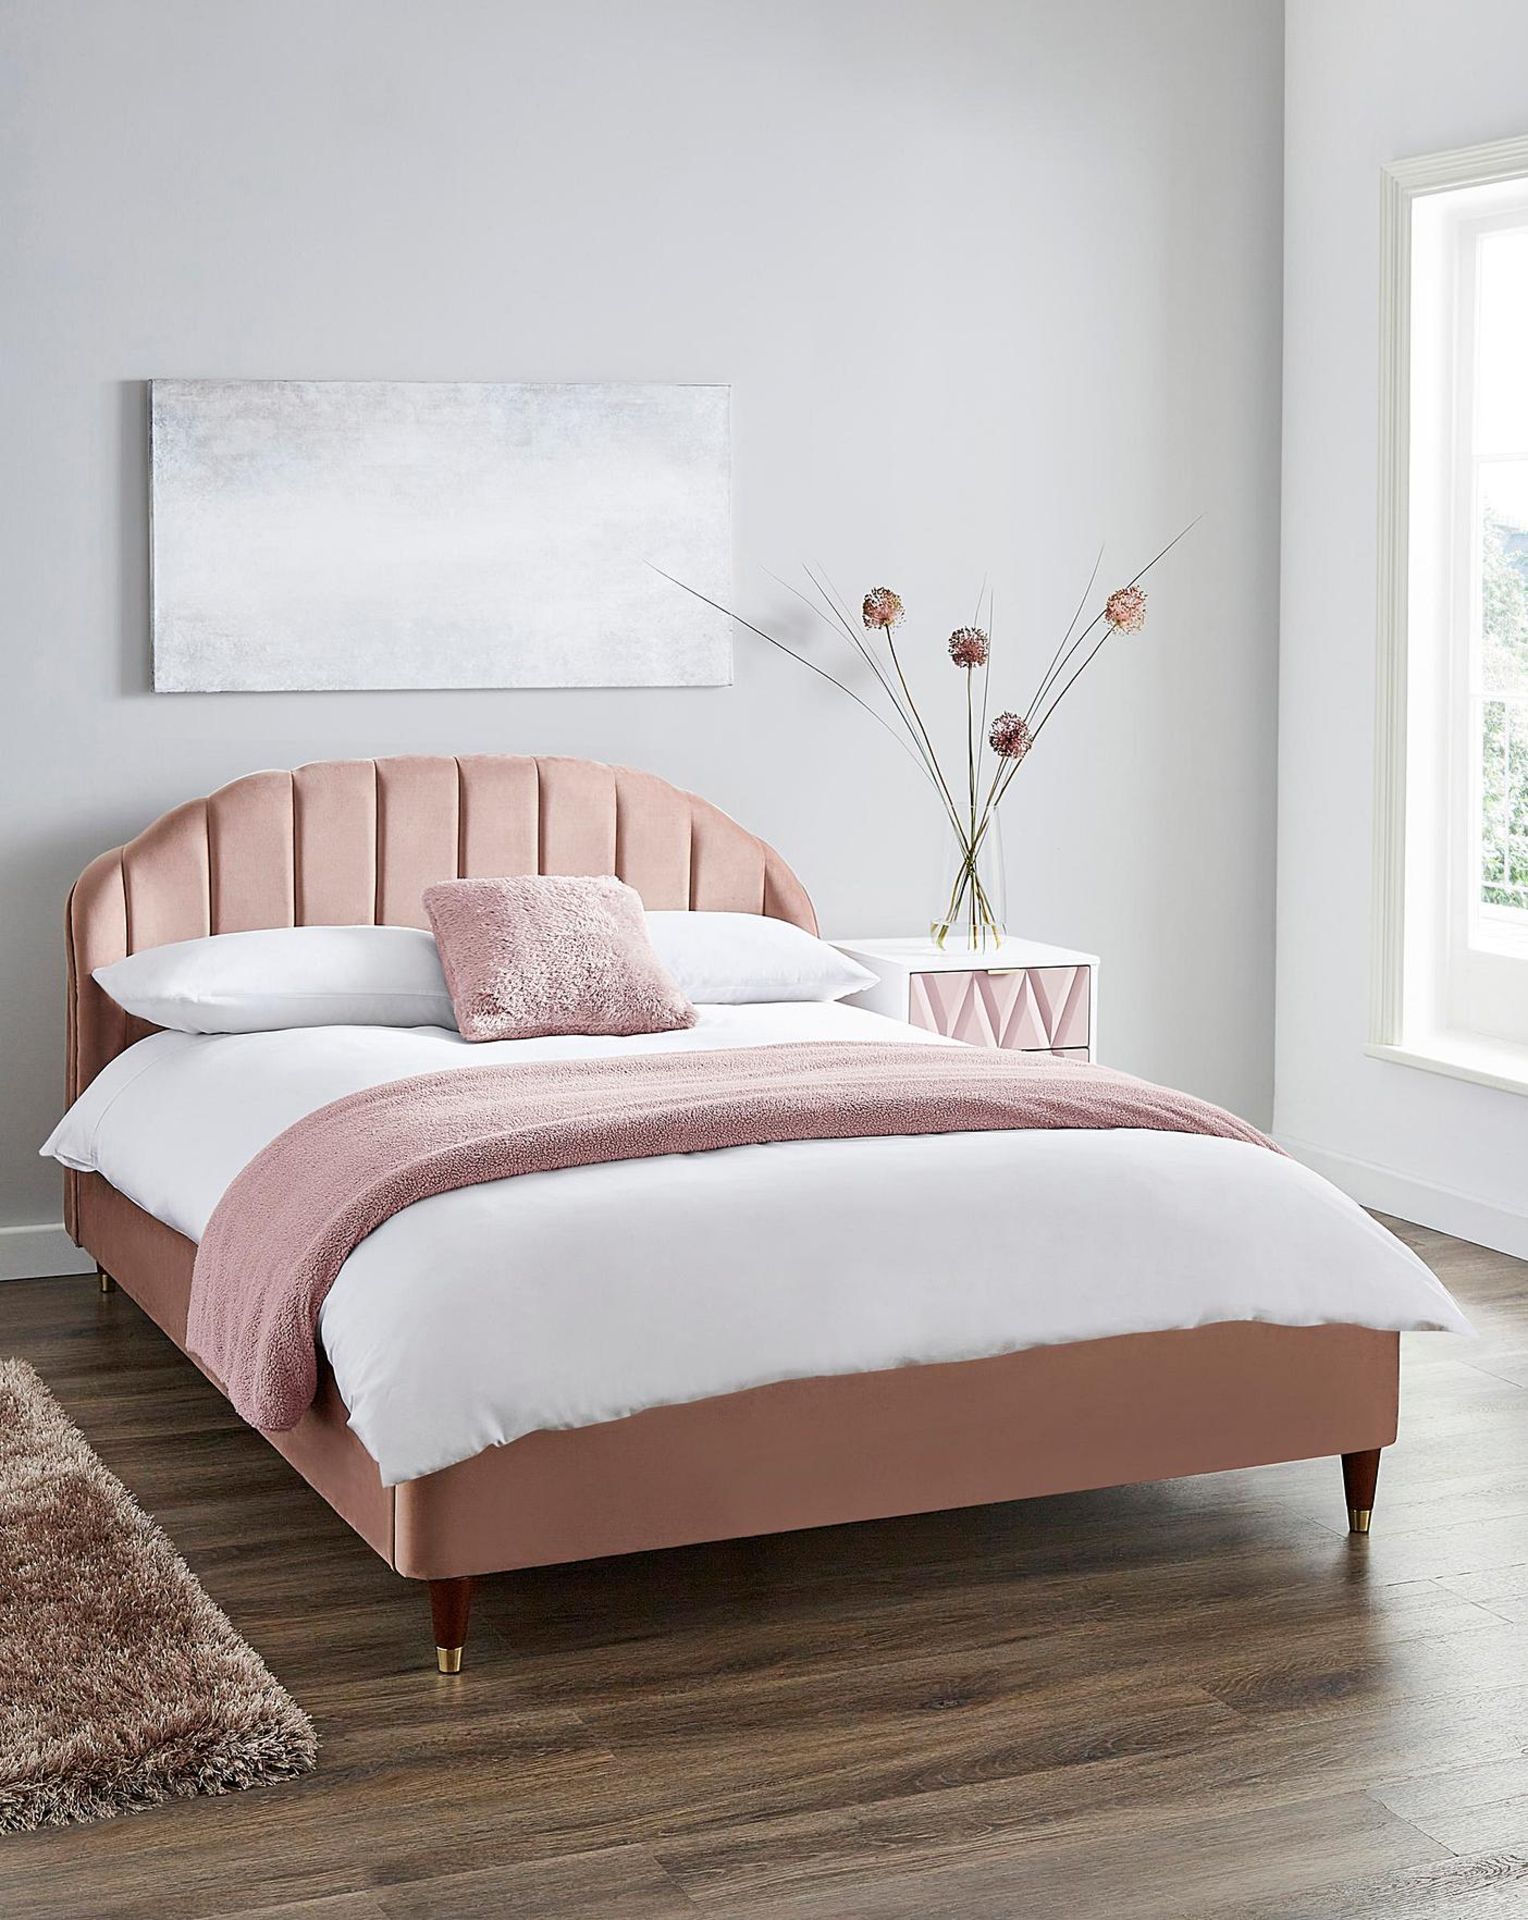 BRAND NEW CLARA Fabric KINGSIZE Bed Frame. BLUSH. RRP £439 EACH. The Clara fabric bed frame features